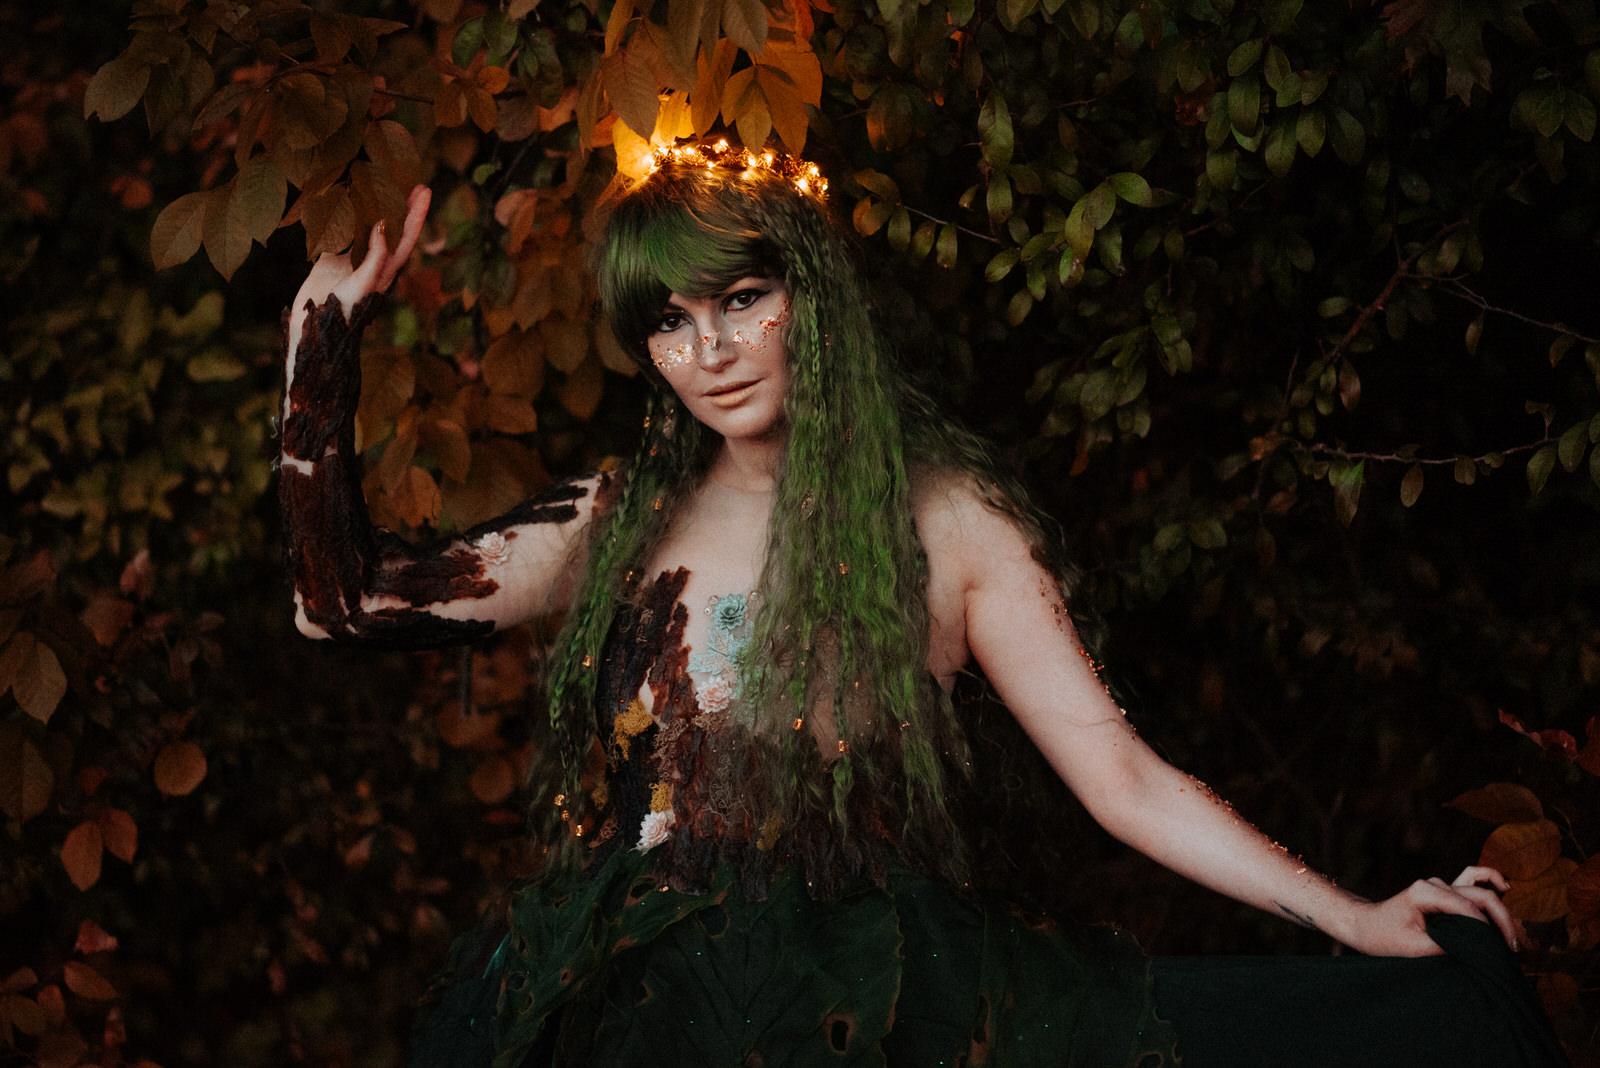 Forest nymph costume